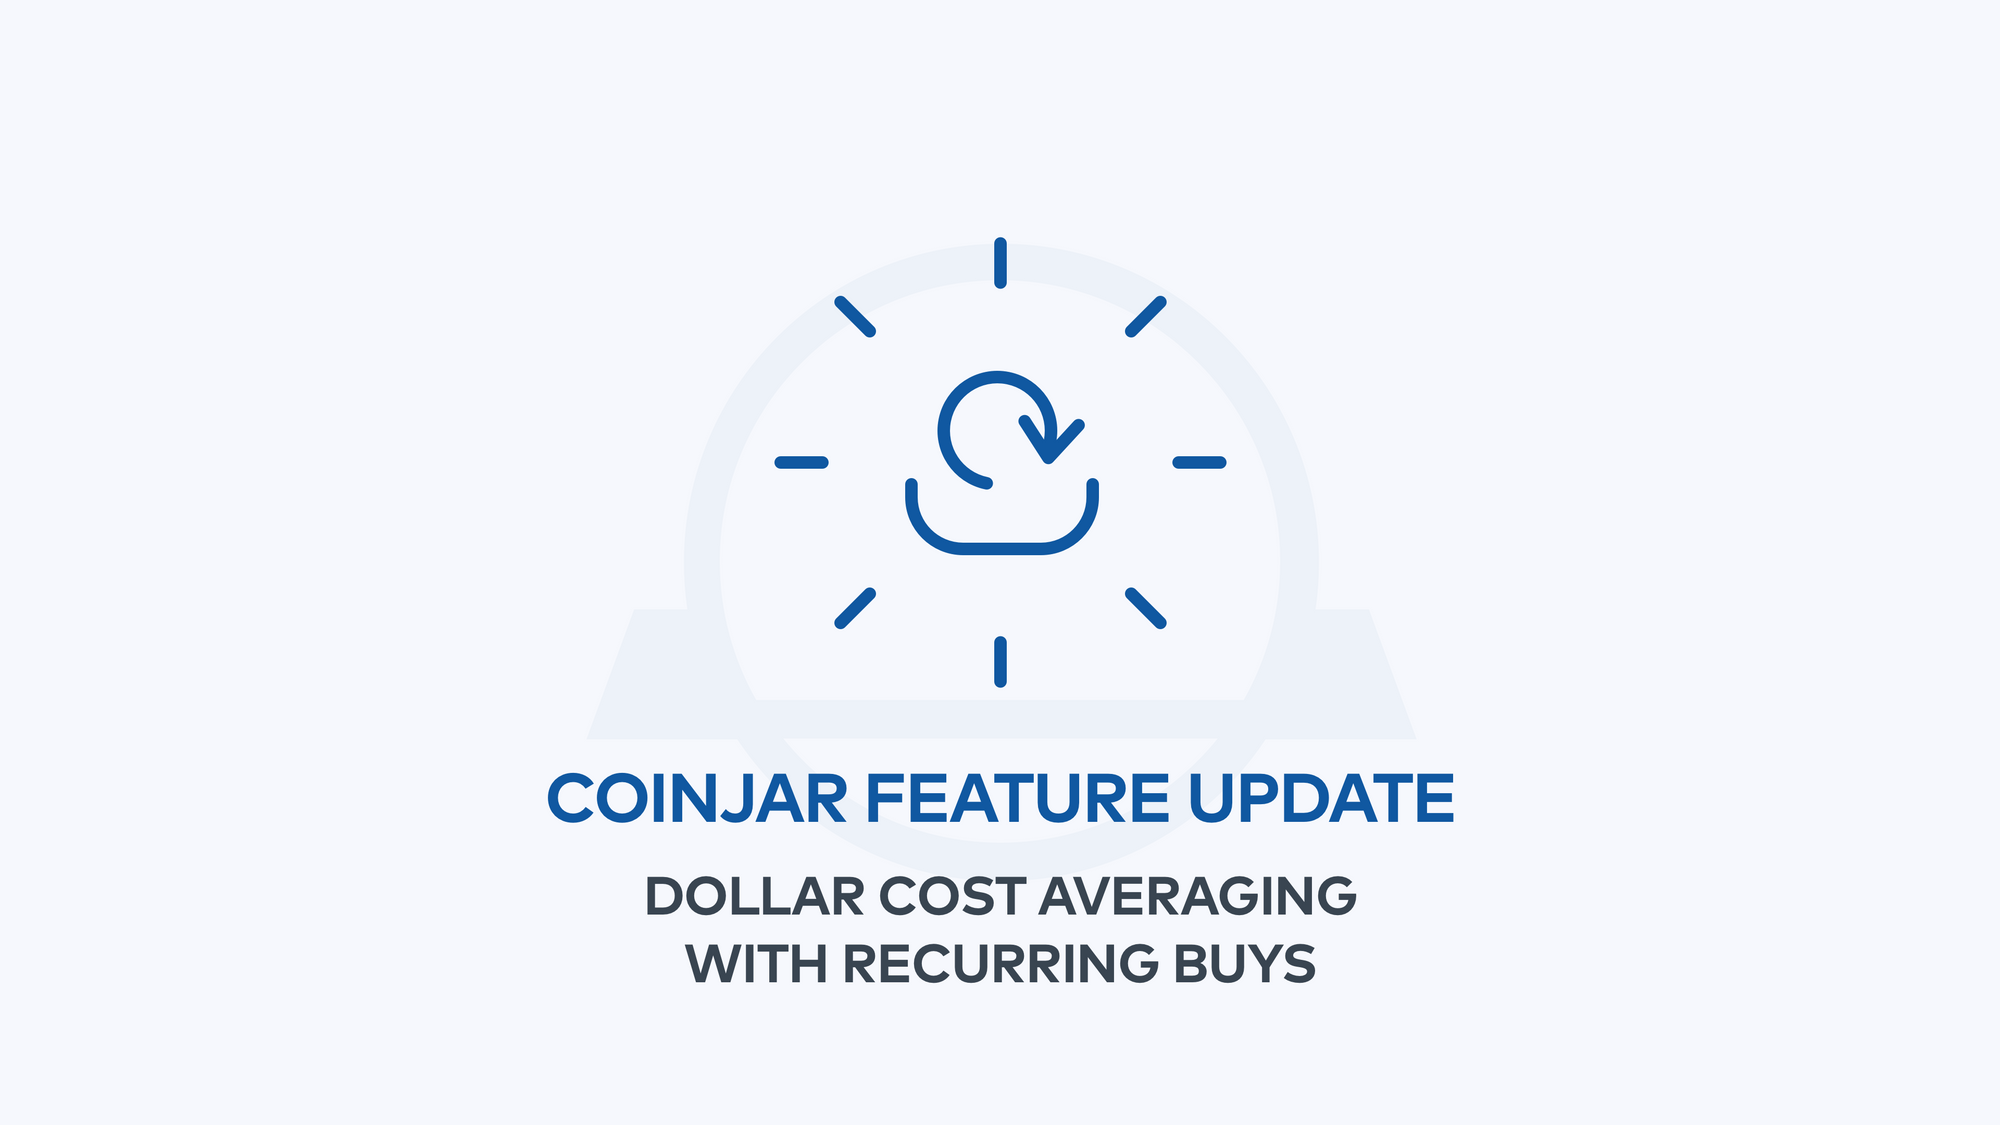 Recurring Buys now available on CoinJar in Australia!